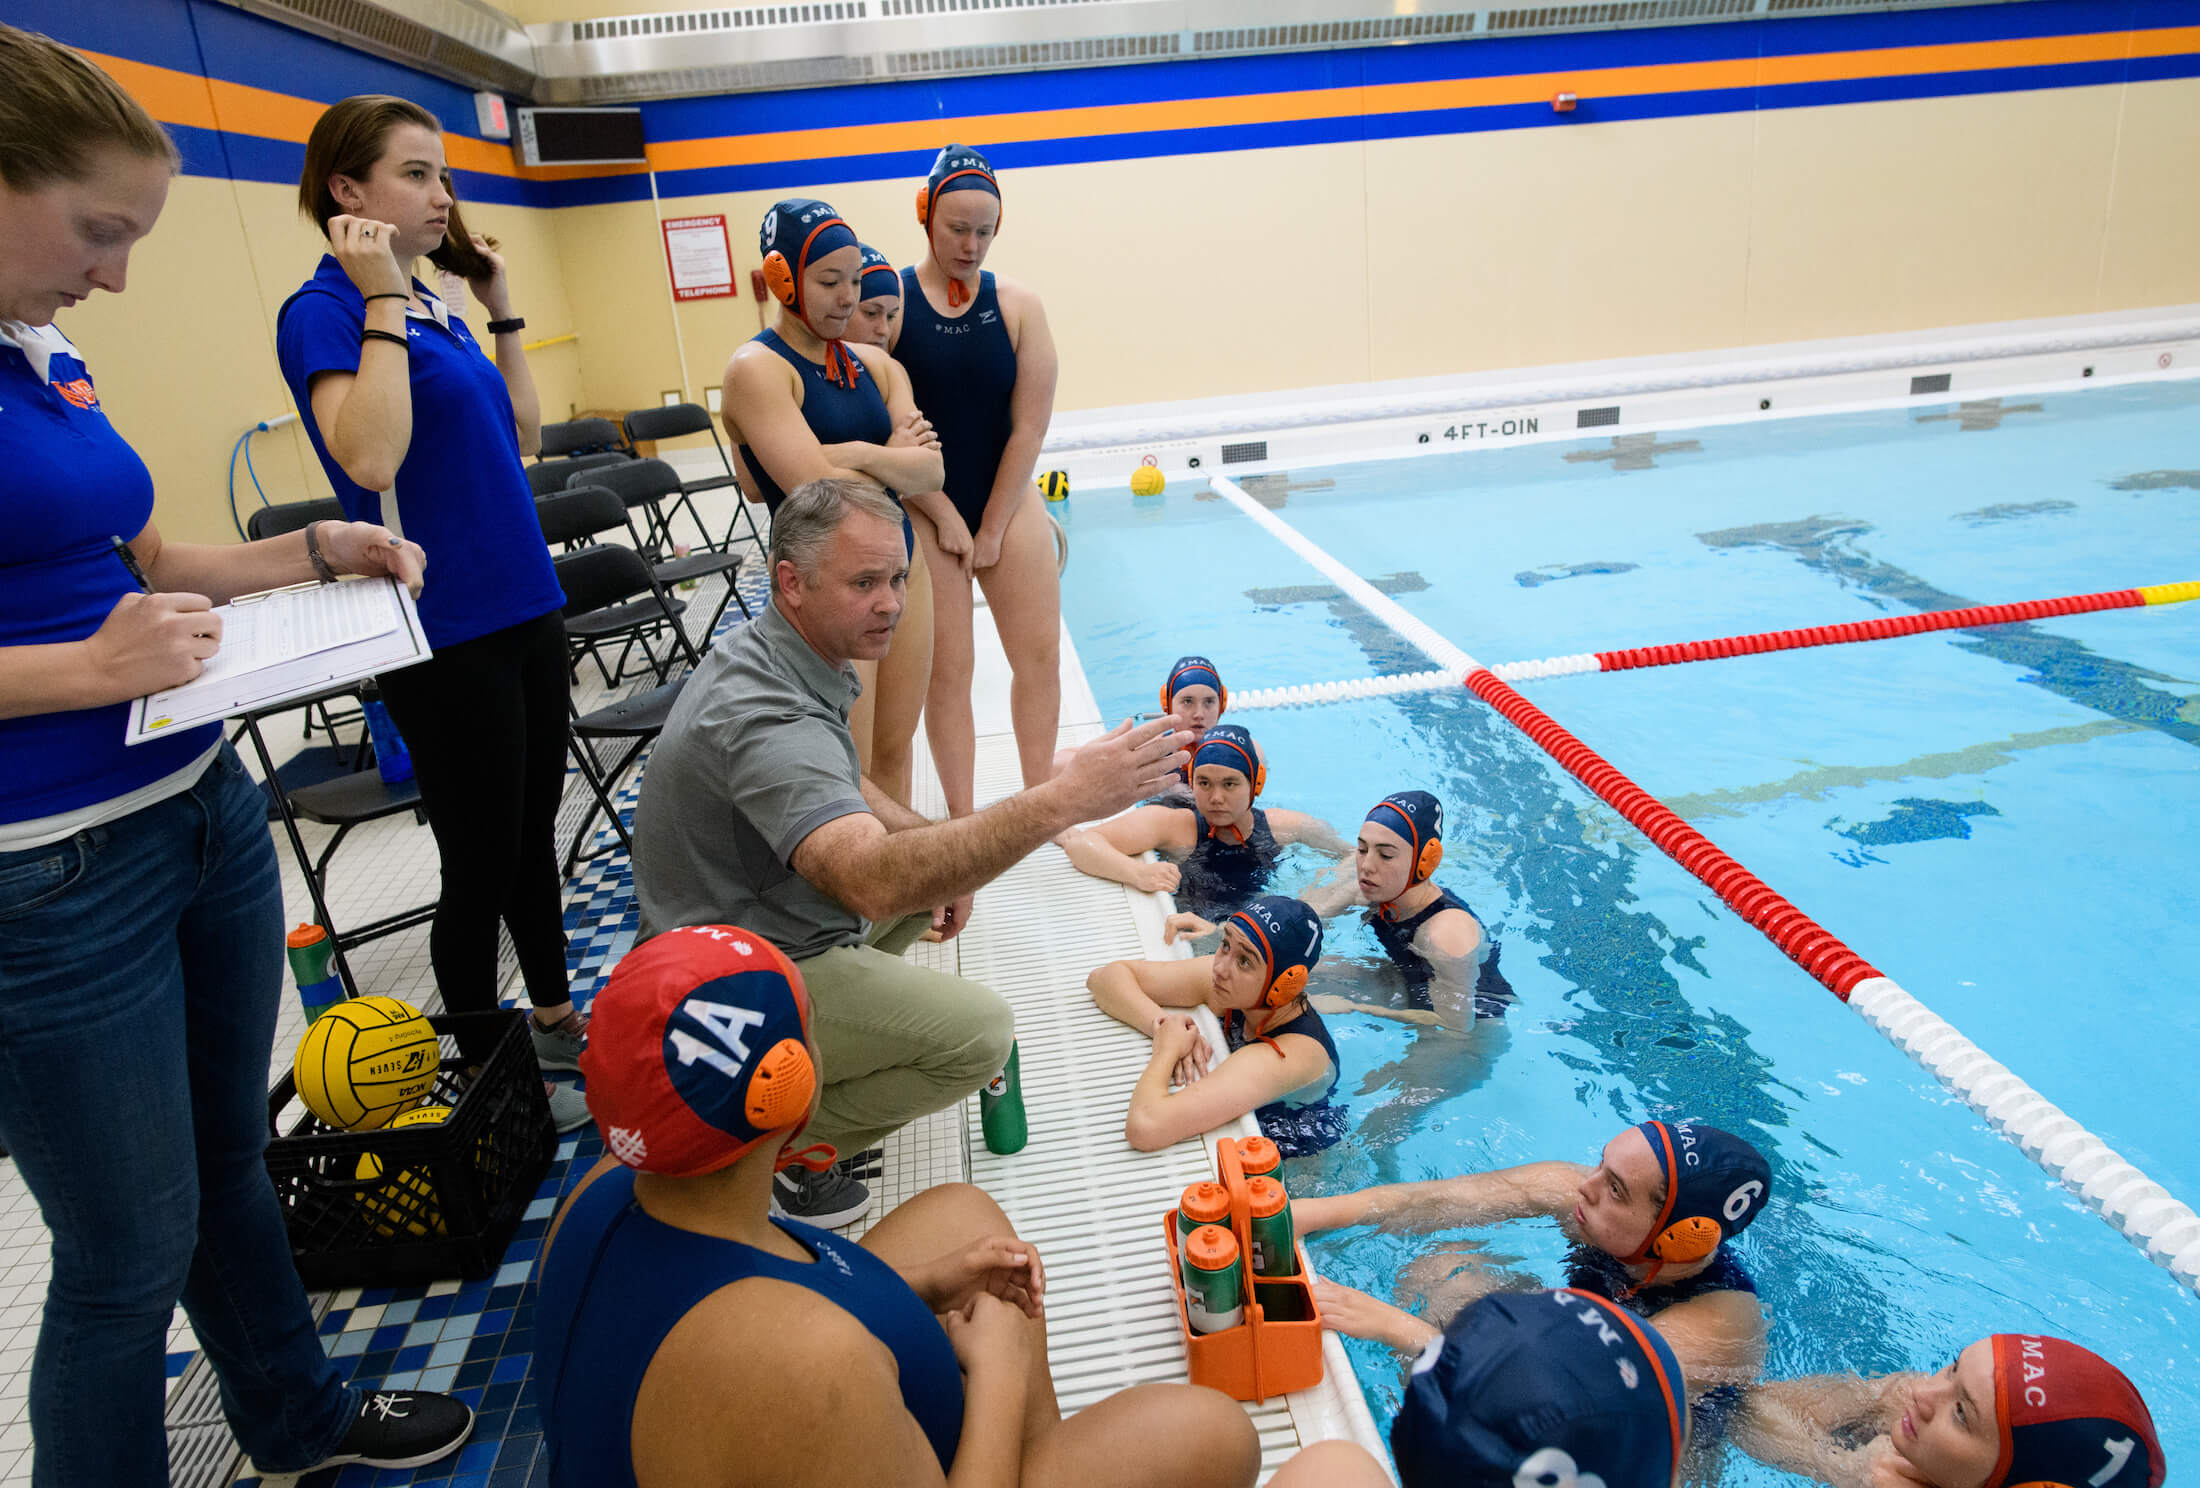 On The Record with Scott Reed, Macalester Women's Water Polo Coach